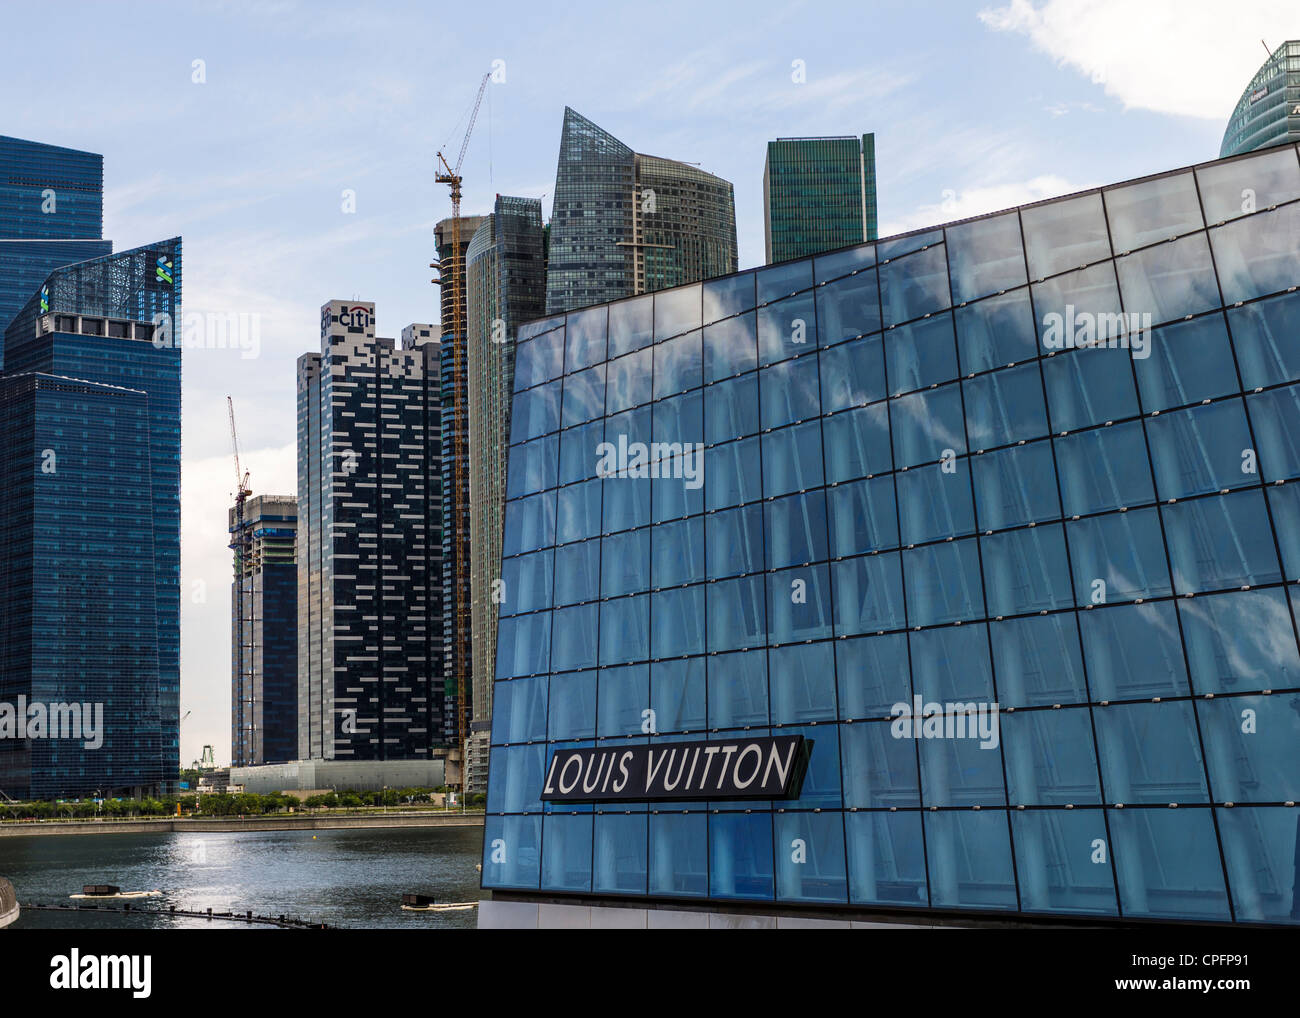 Louis Vuitton shop at Marina Bay Sands, Singapore. A modern shopping, hotel and casino complex. Stock Photo